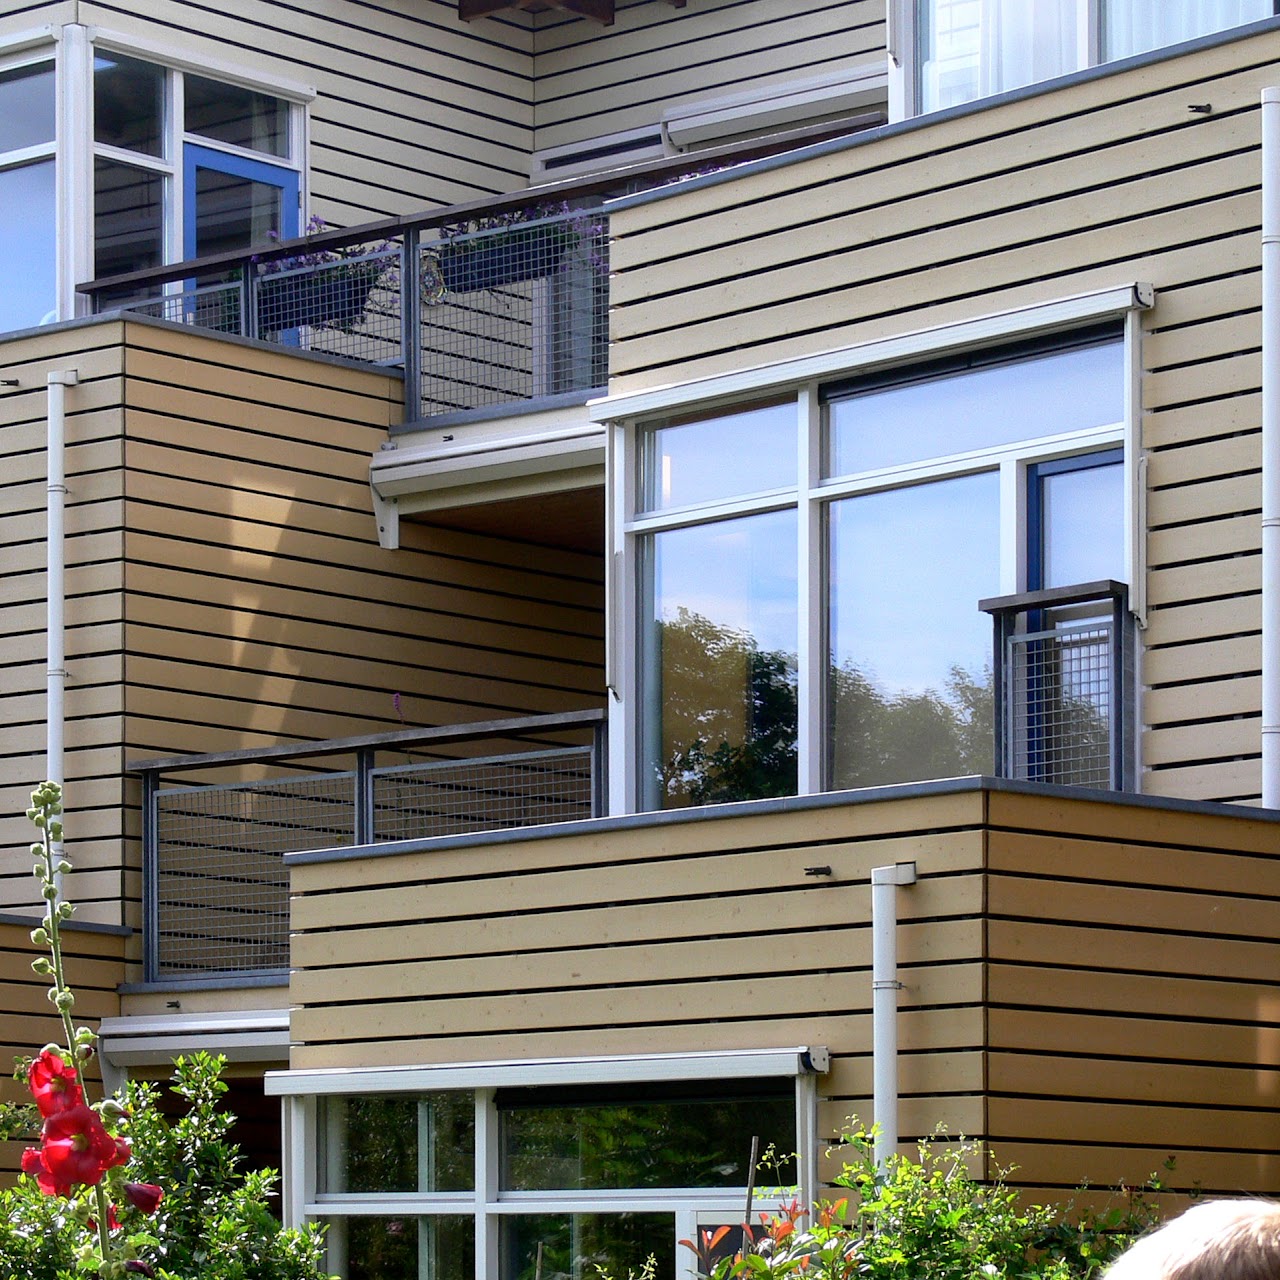 HardiePlank Siding: A Blend of Style and Durability